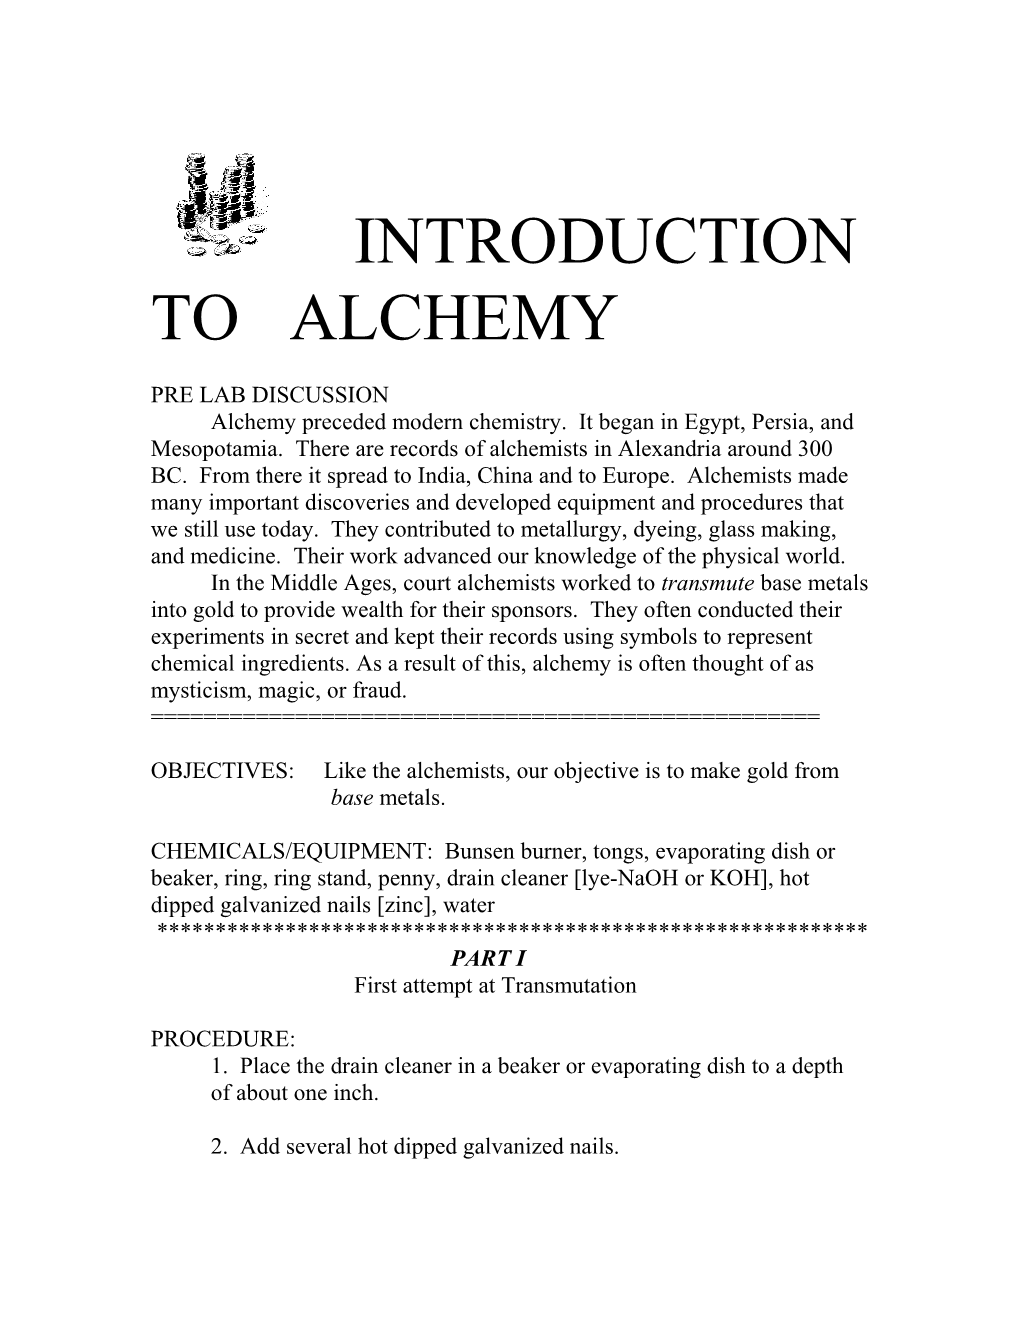 OBJECTIVES: Like the Alchemists, Our Objective Is to Make Gold From